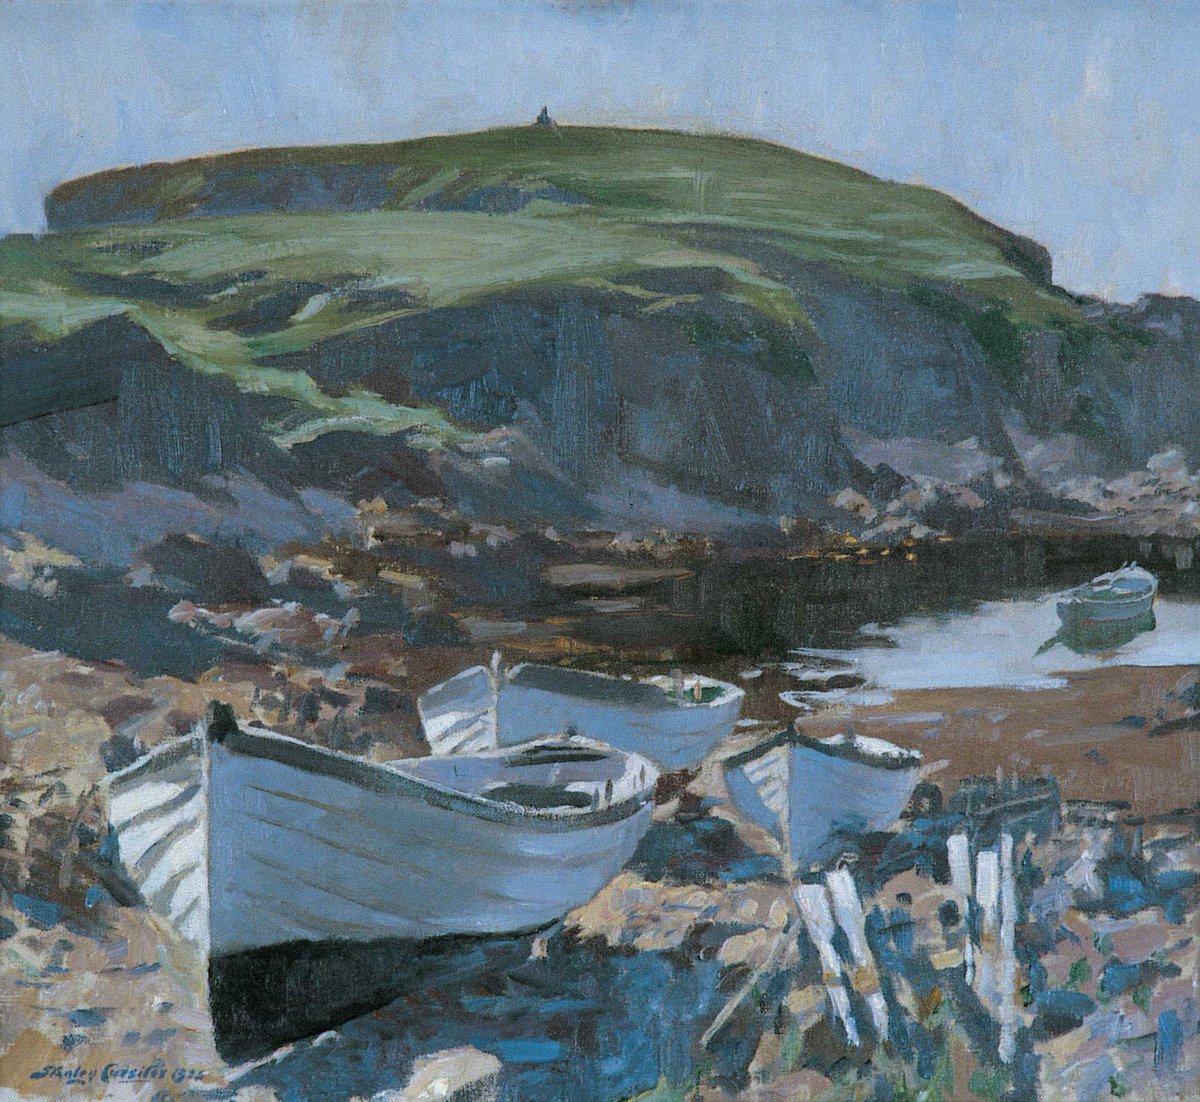 Today we celebrate the birth of Orcadian artist Stanley Cursiter (1887-1976) with Geo at Yesnaby and Brough of Bigging, 1924 from our Collection

© Estate of Stanley Cursiter. All Rights Reserved, DACS 2024

#PierArtsCentre #Orkney